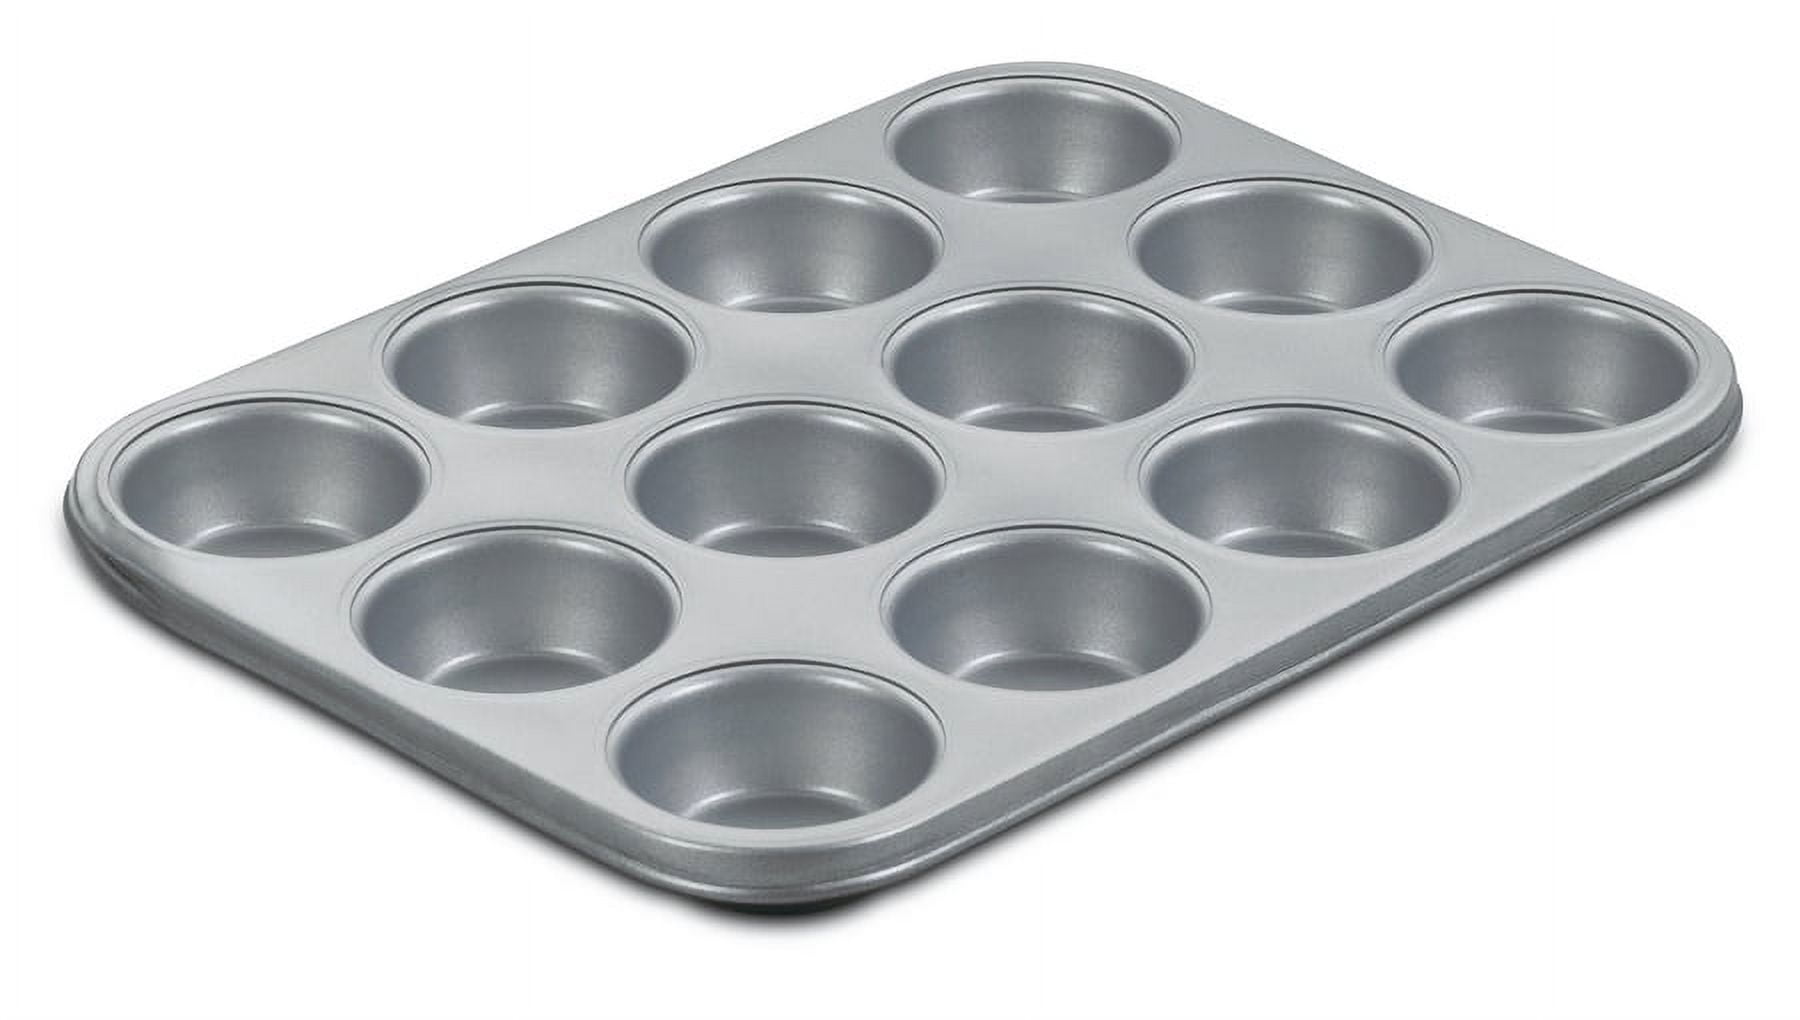 NEW CUISINART CHEF'S CLASSIC 6-CUP MUFFIN TOP PAN SILVER NON STICK BAKEWARE